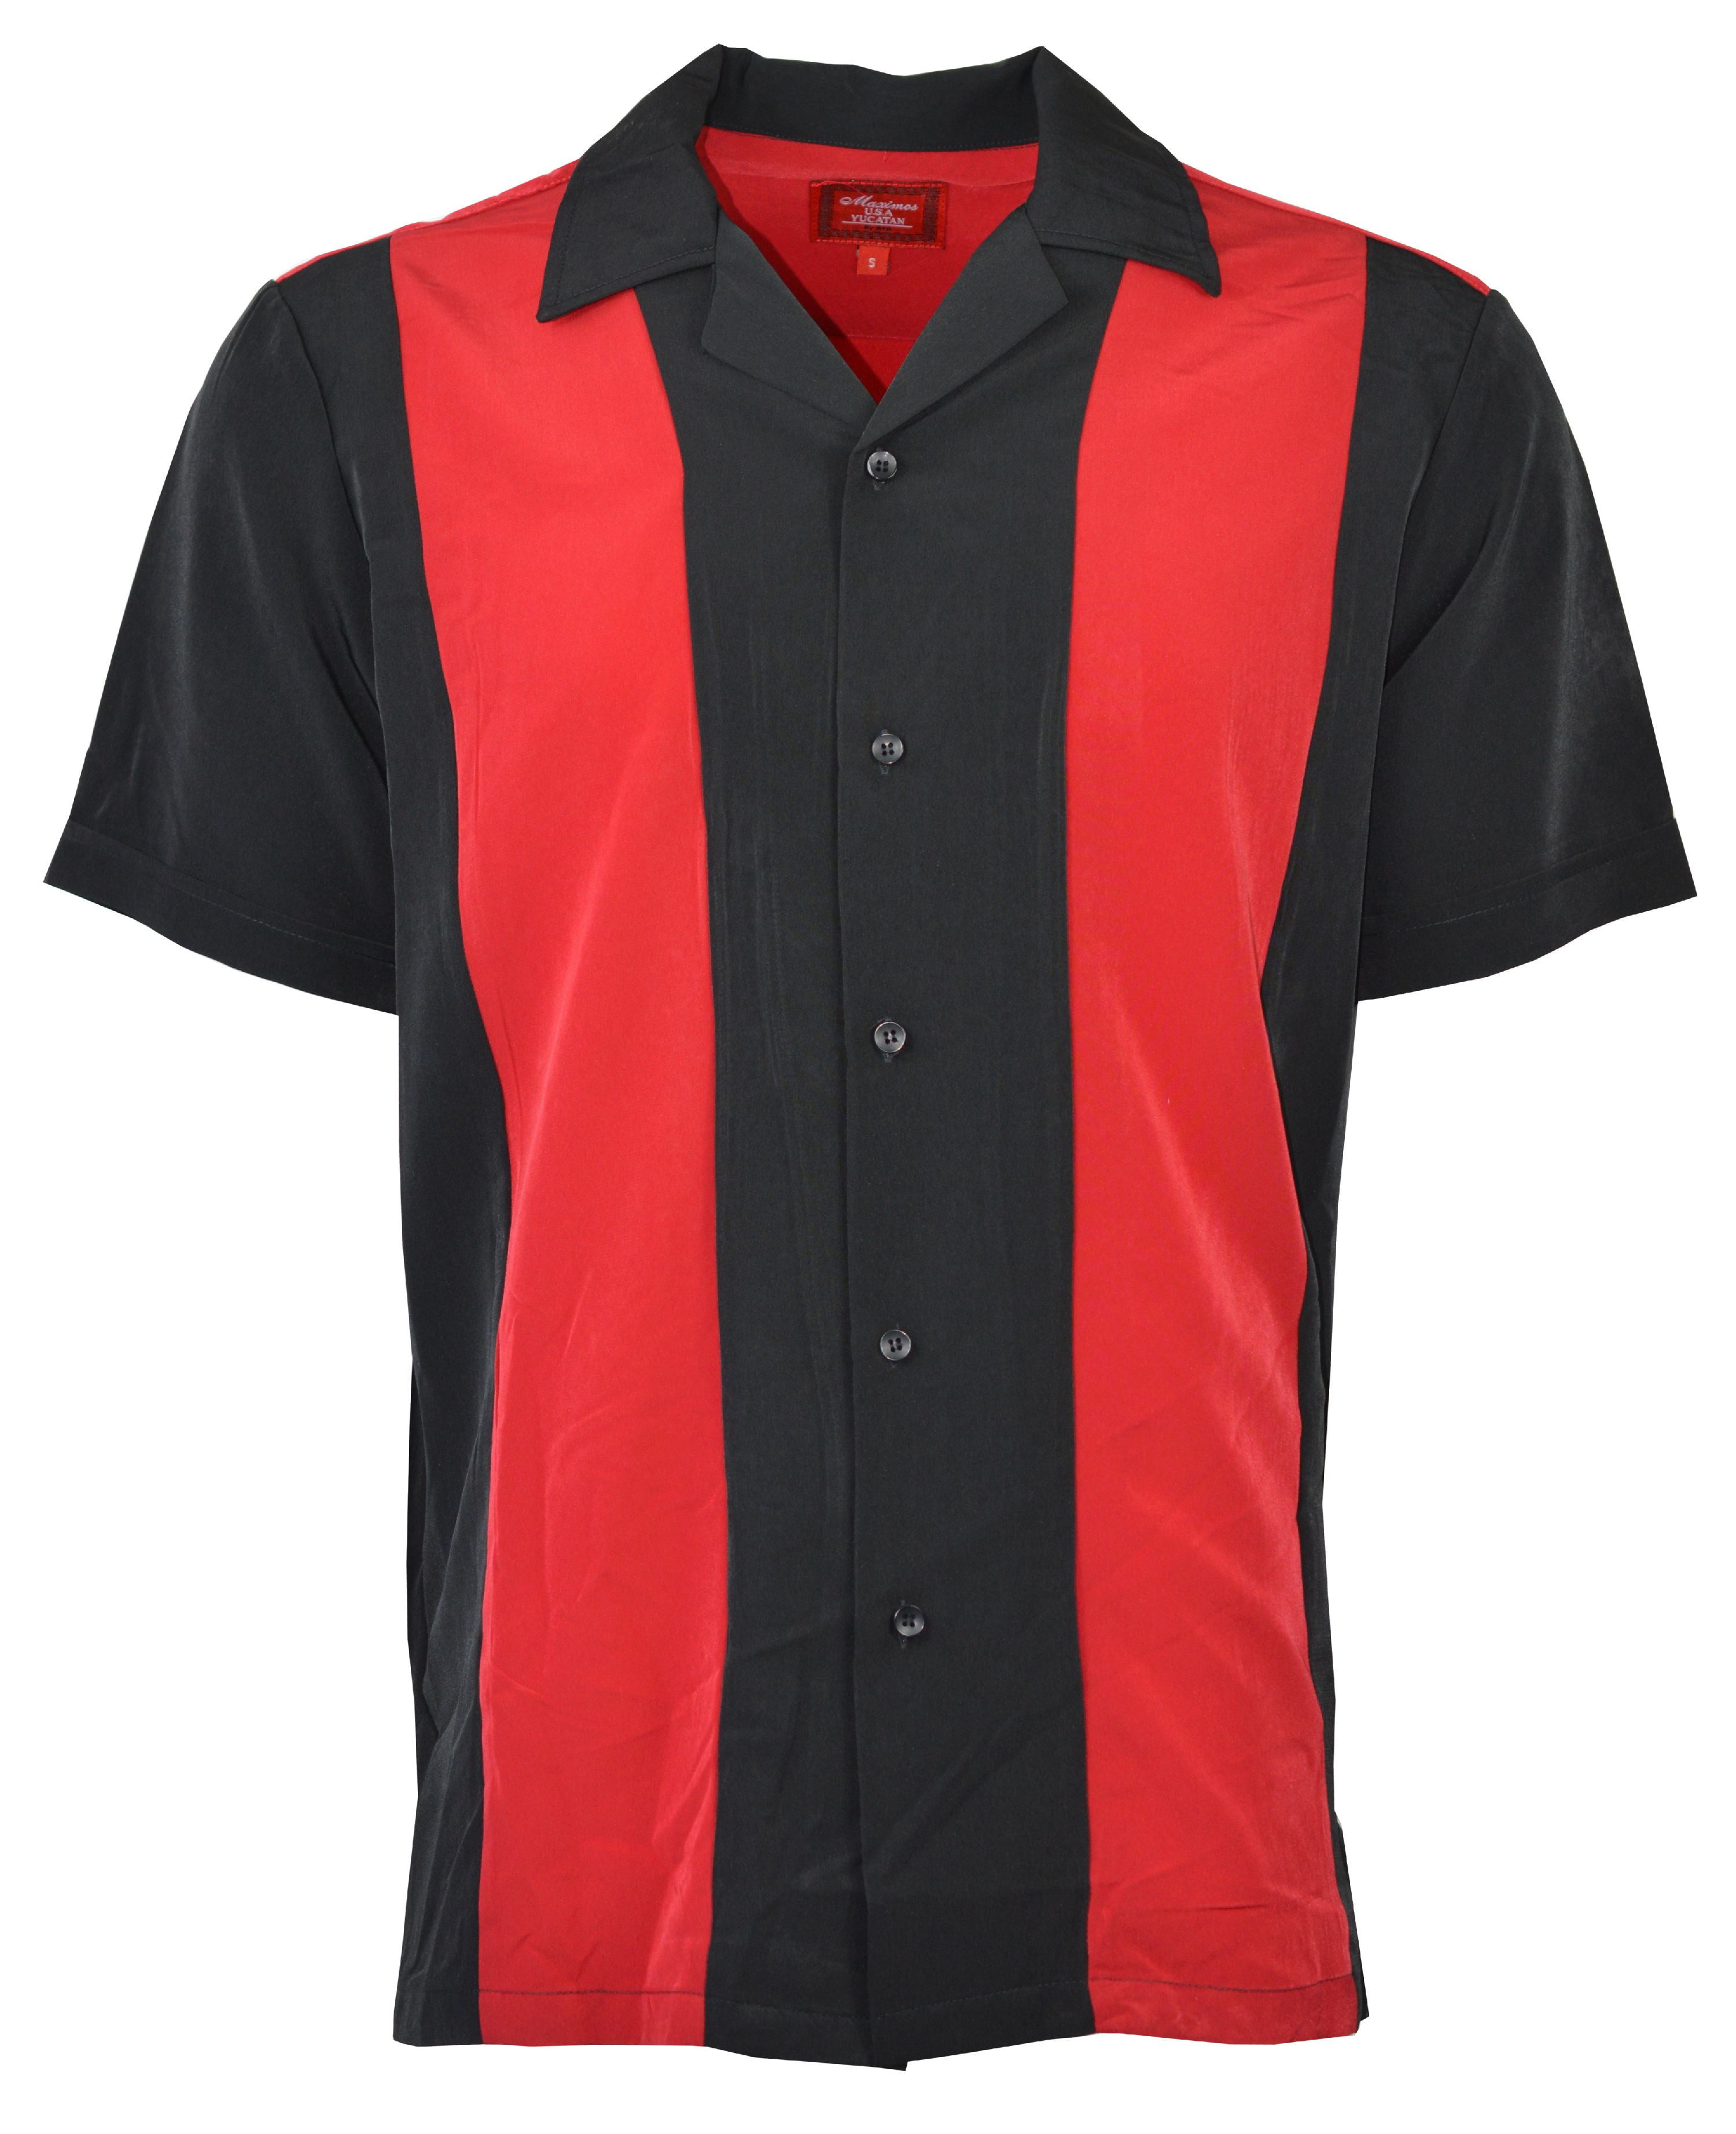 Maximos Men's Bowling Shirt Retro Button-Up Short Sleeved Striped Color Block Red - Black S ...